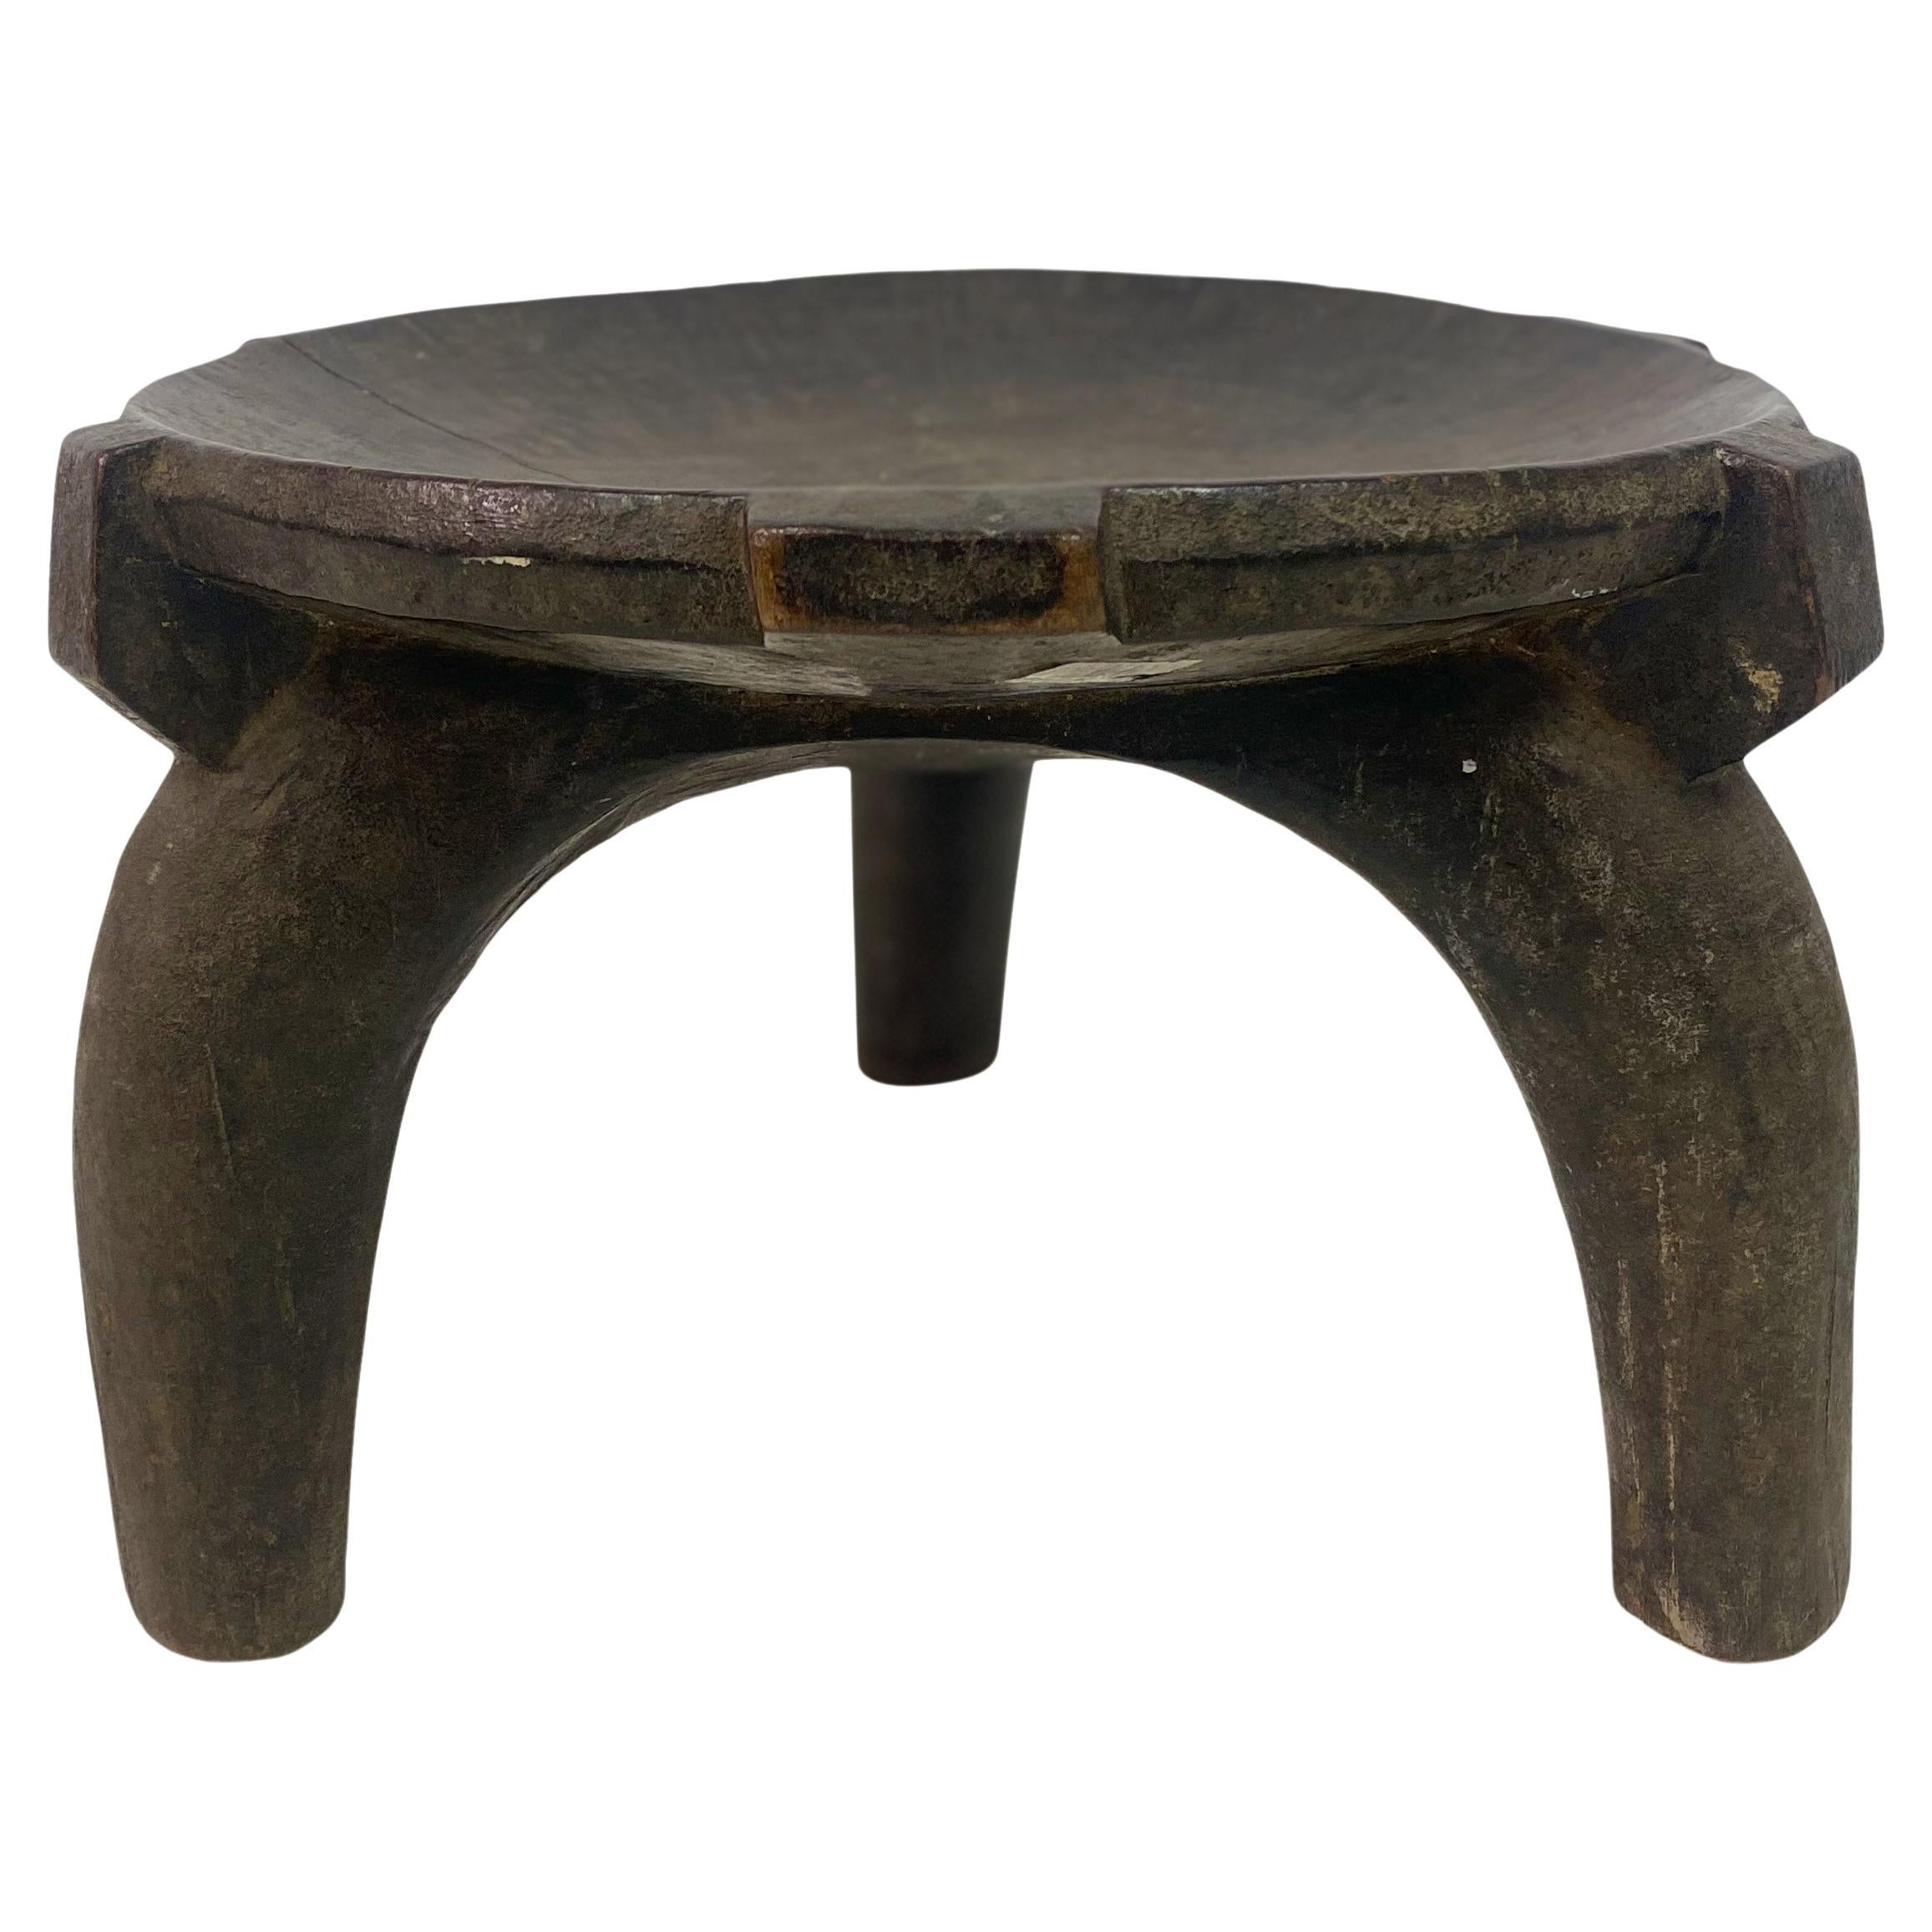 Early 20th Century, African Tripod Stool